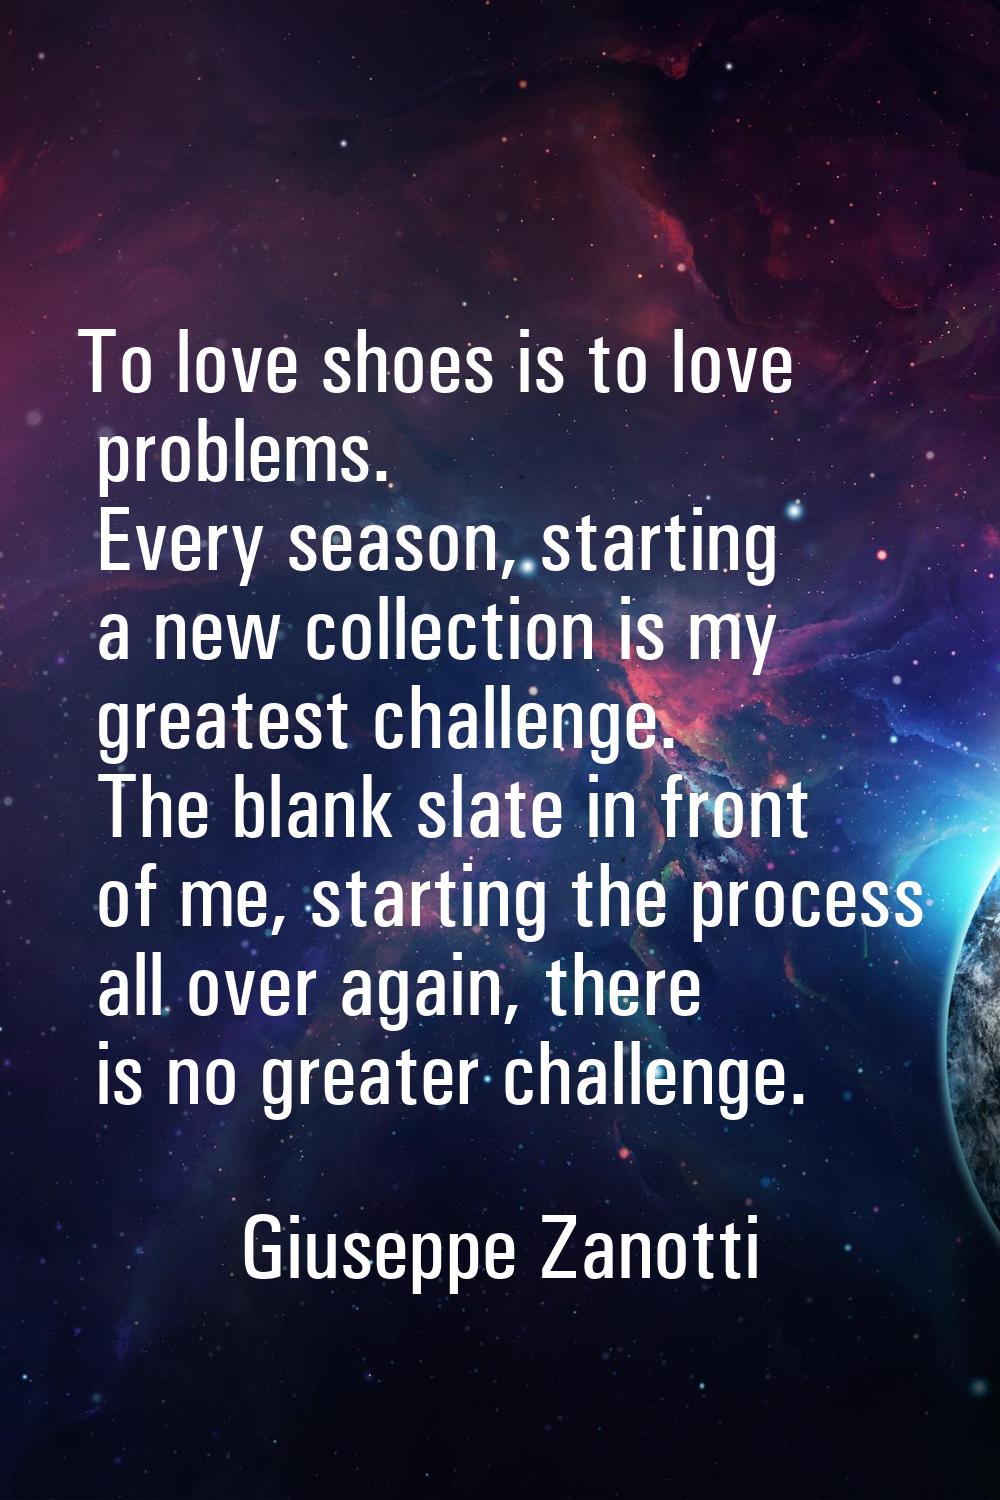 To love shoes is to love problems. Every season, starting a new collection is my greatest challenge